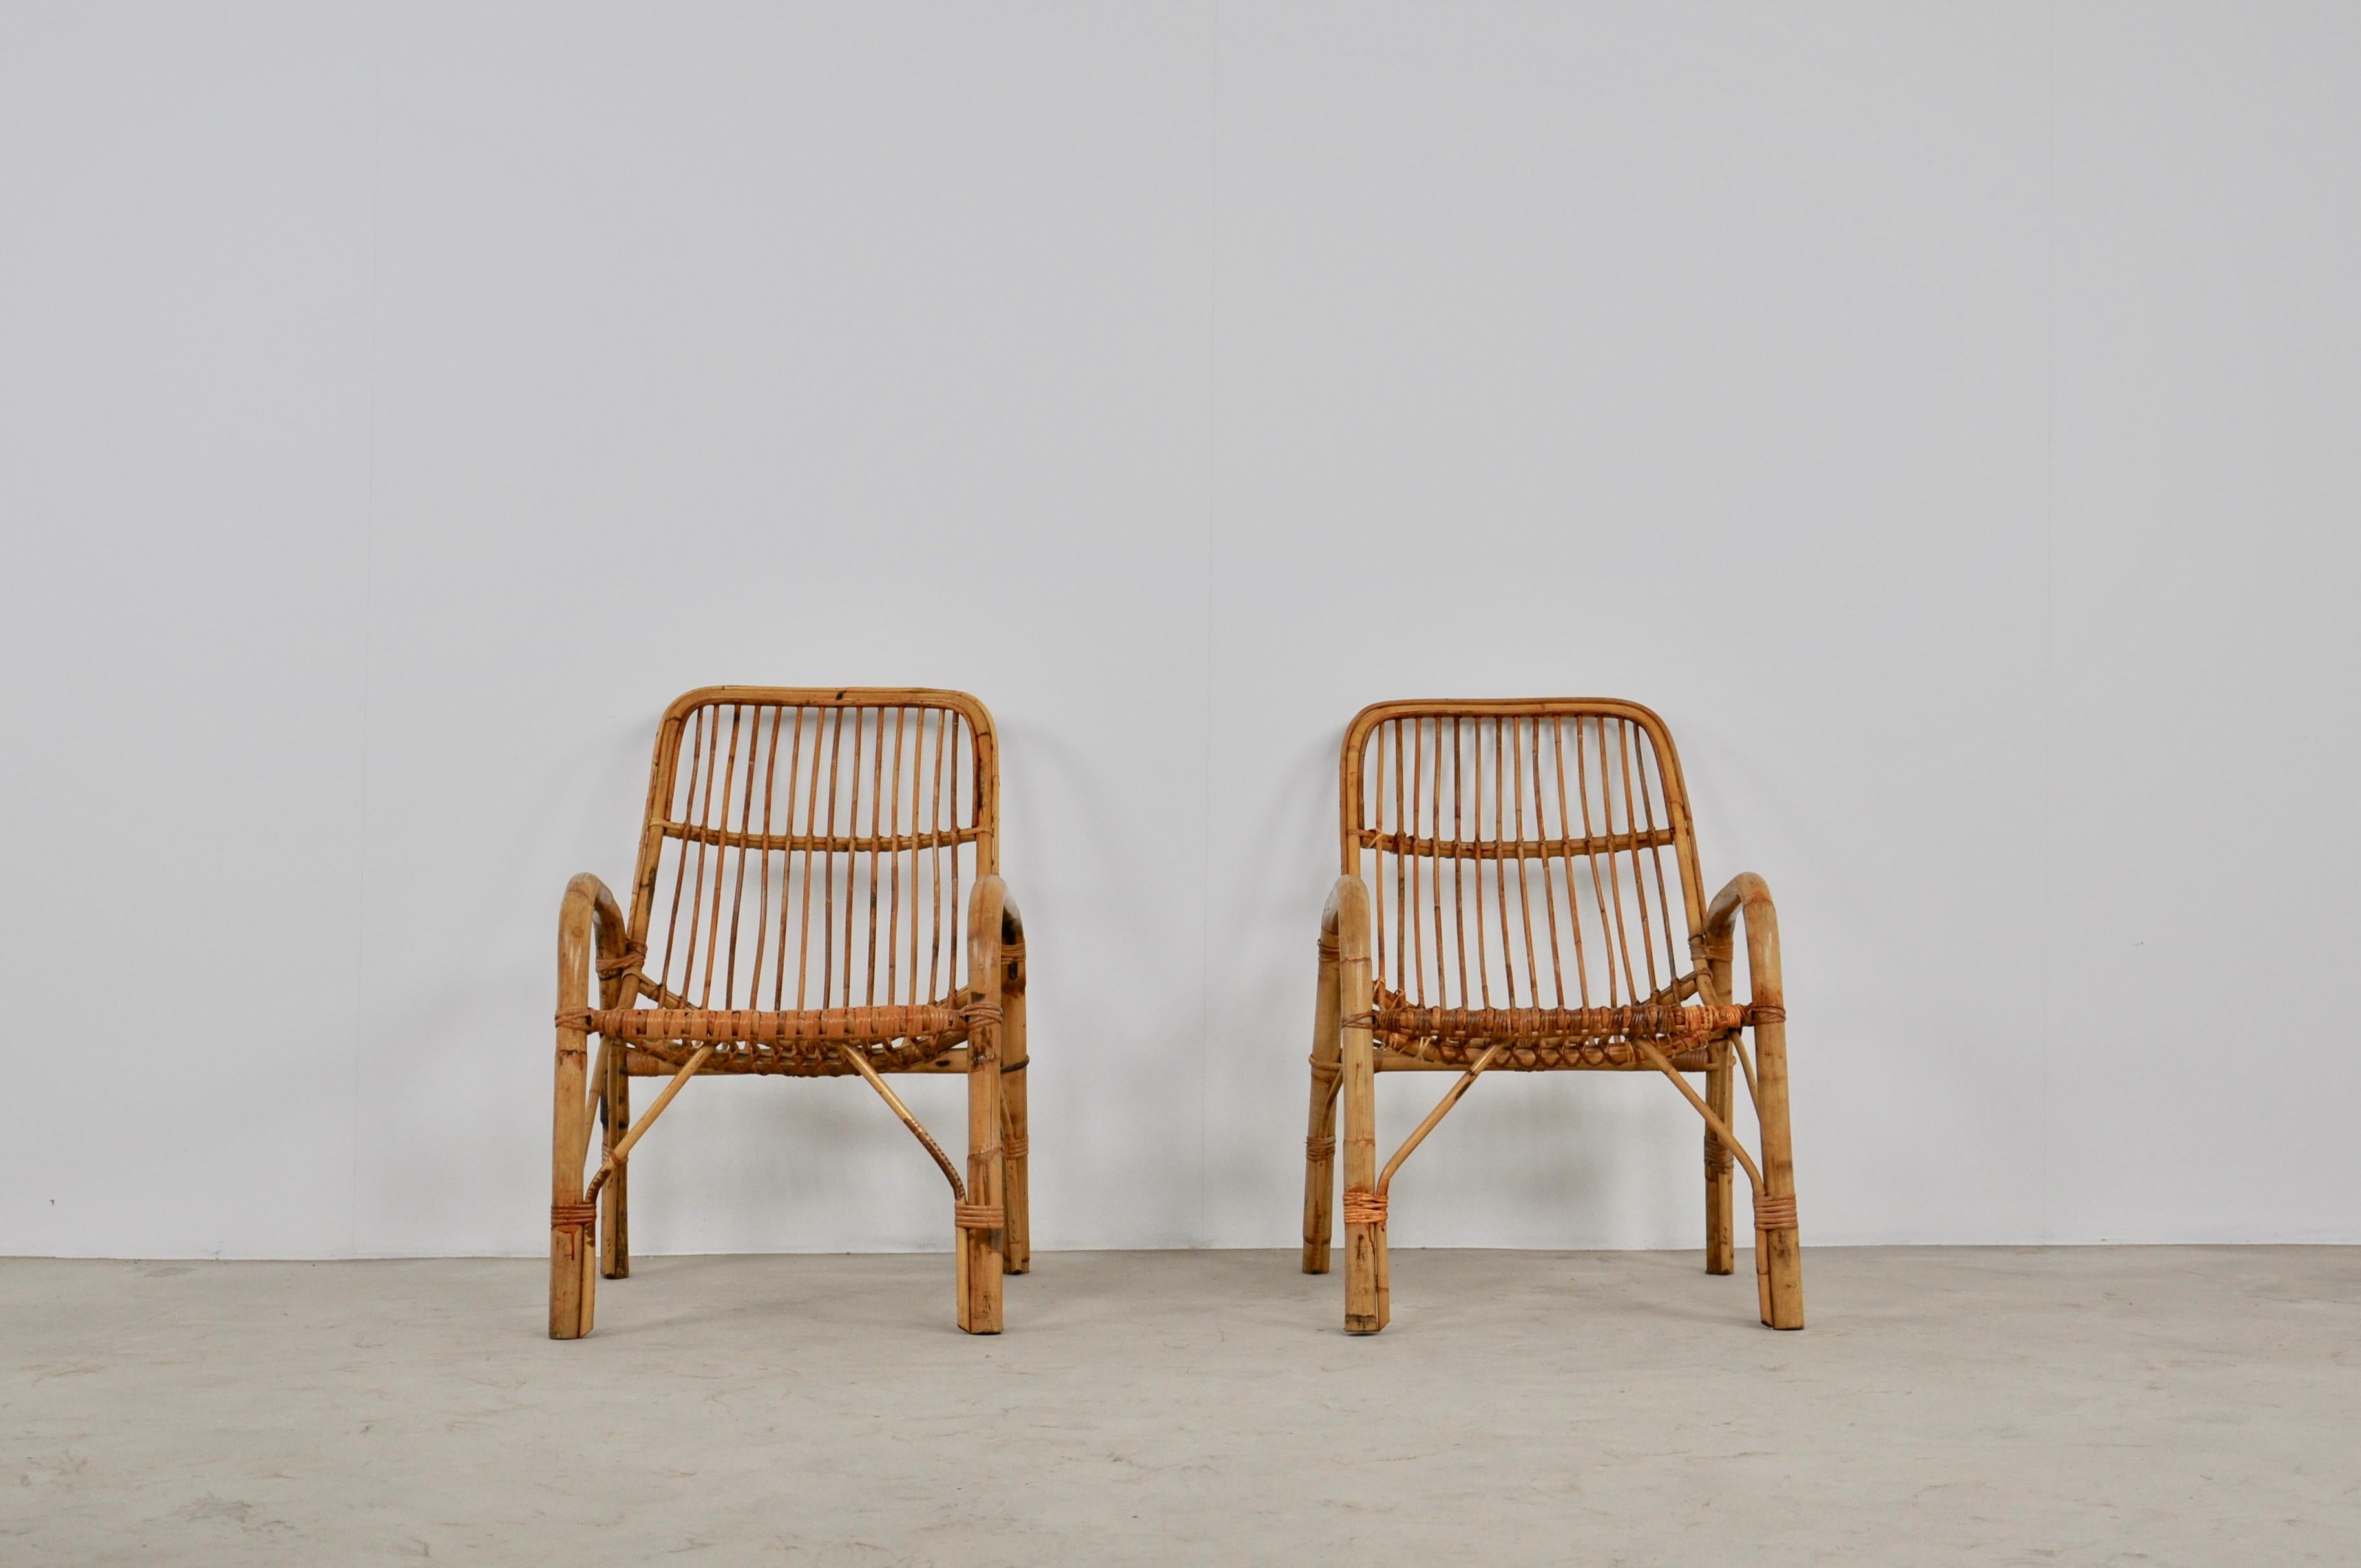 Pair of rattan armchairs. Wear due to time and age of the armchairs. Measure: Seat height 40 cm.